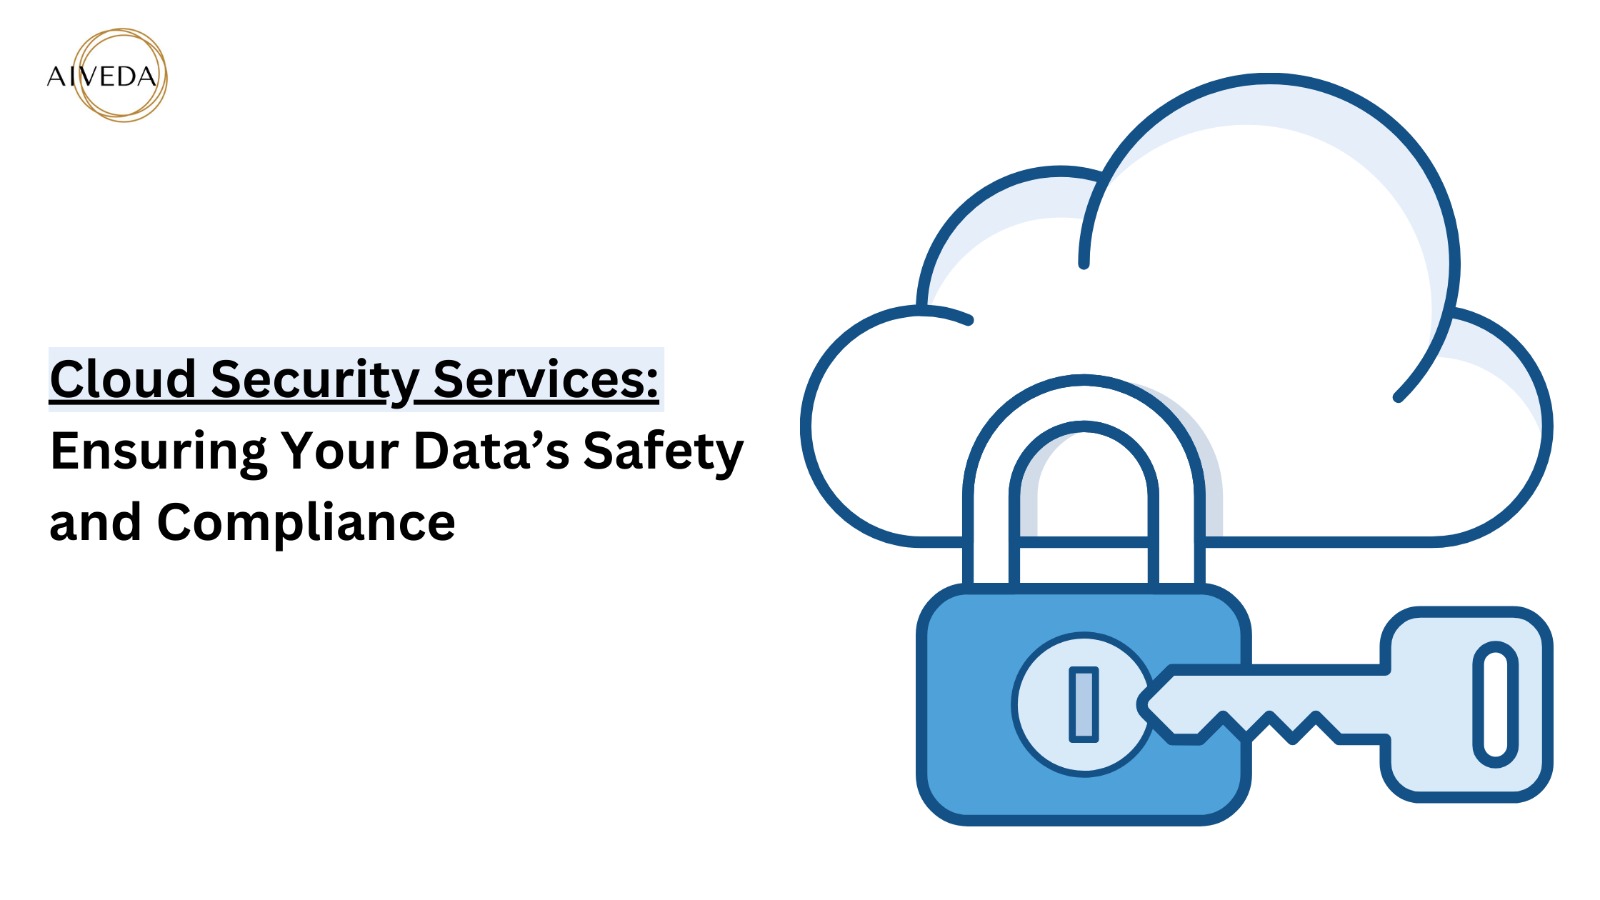 Comprehensive Cloud Security Services: Ensuring Your Data’s Safety and Compliance